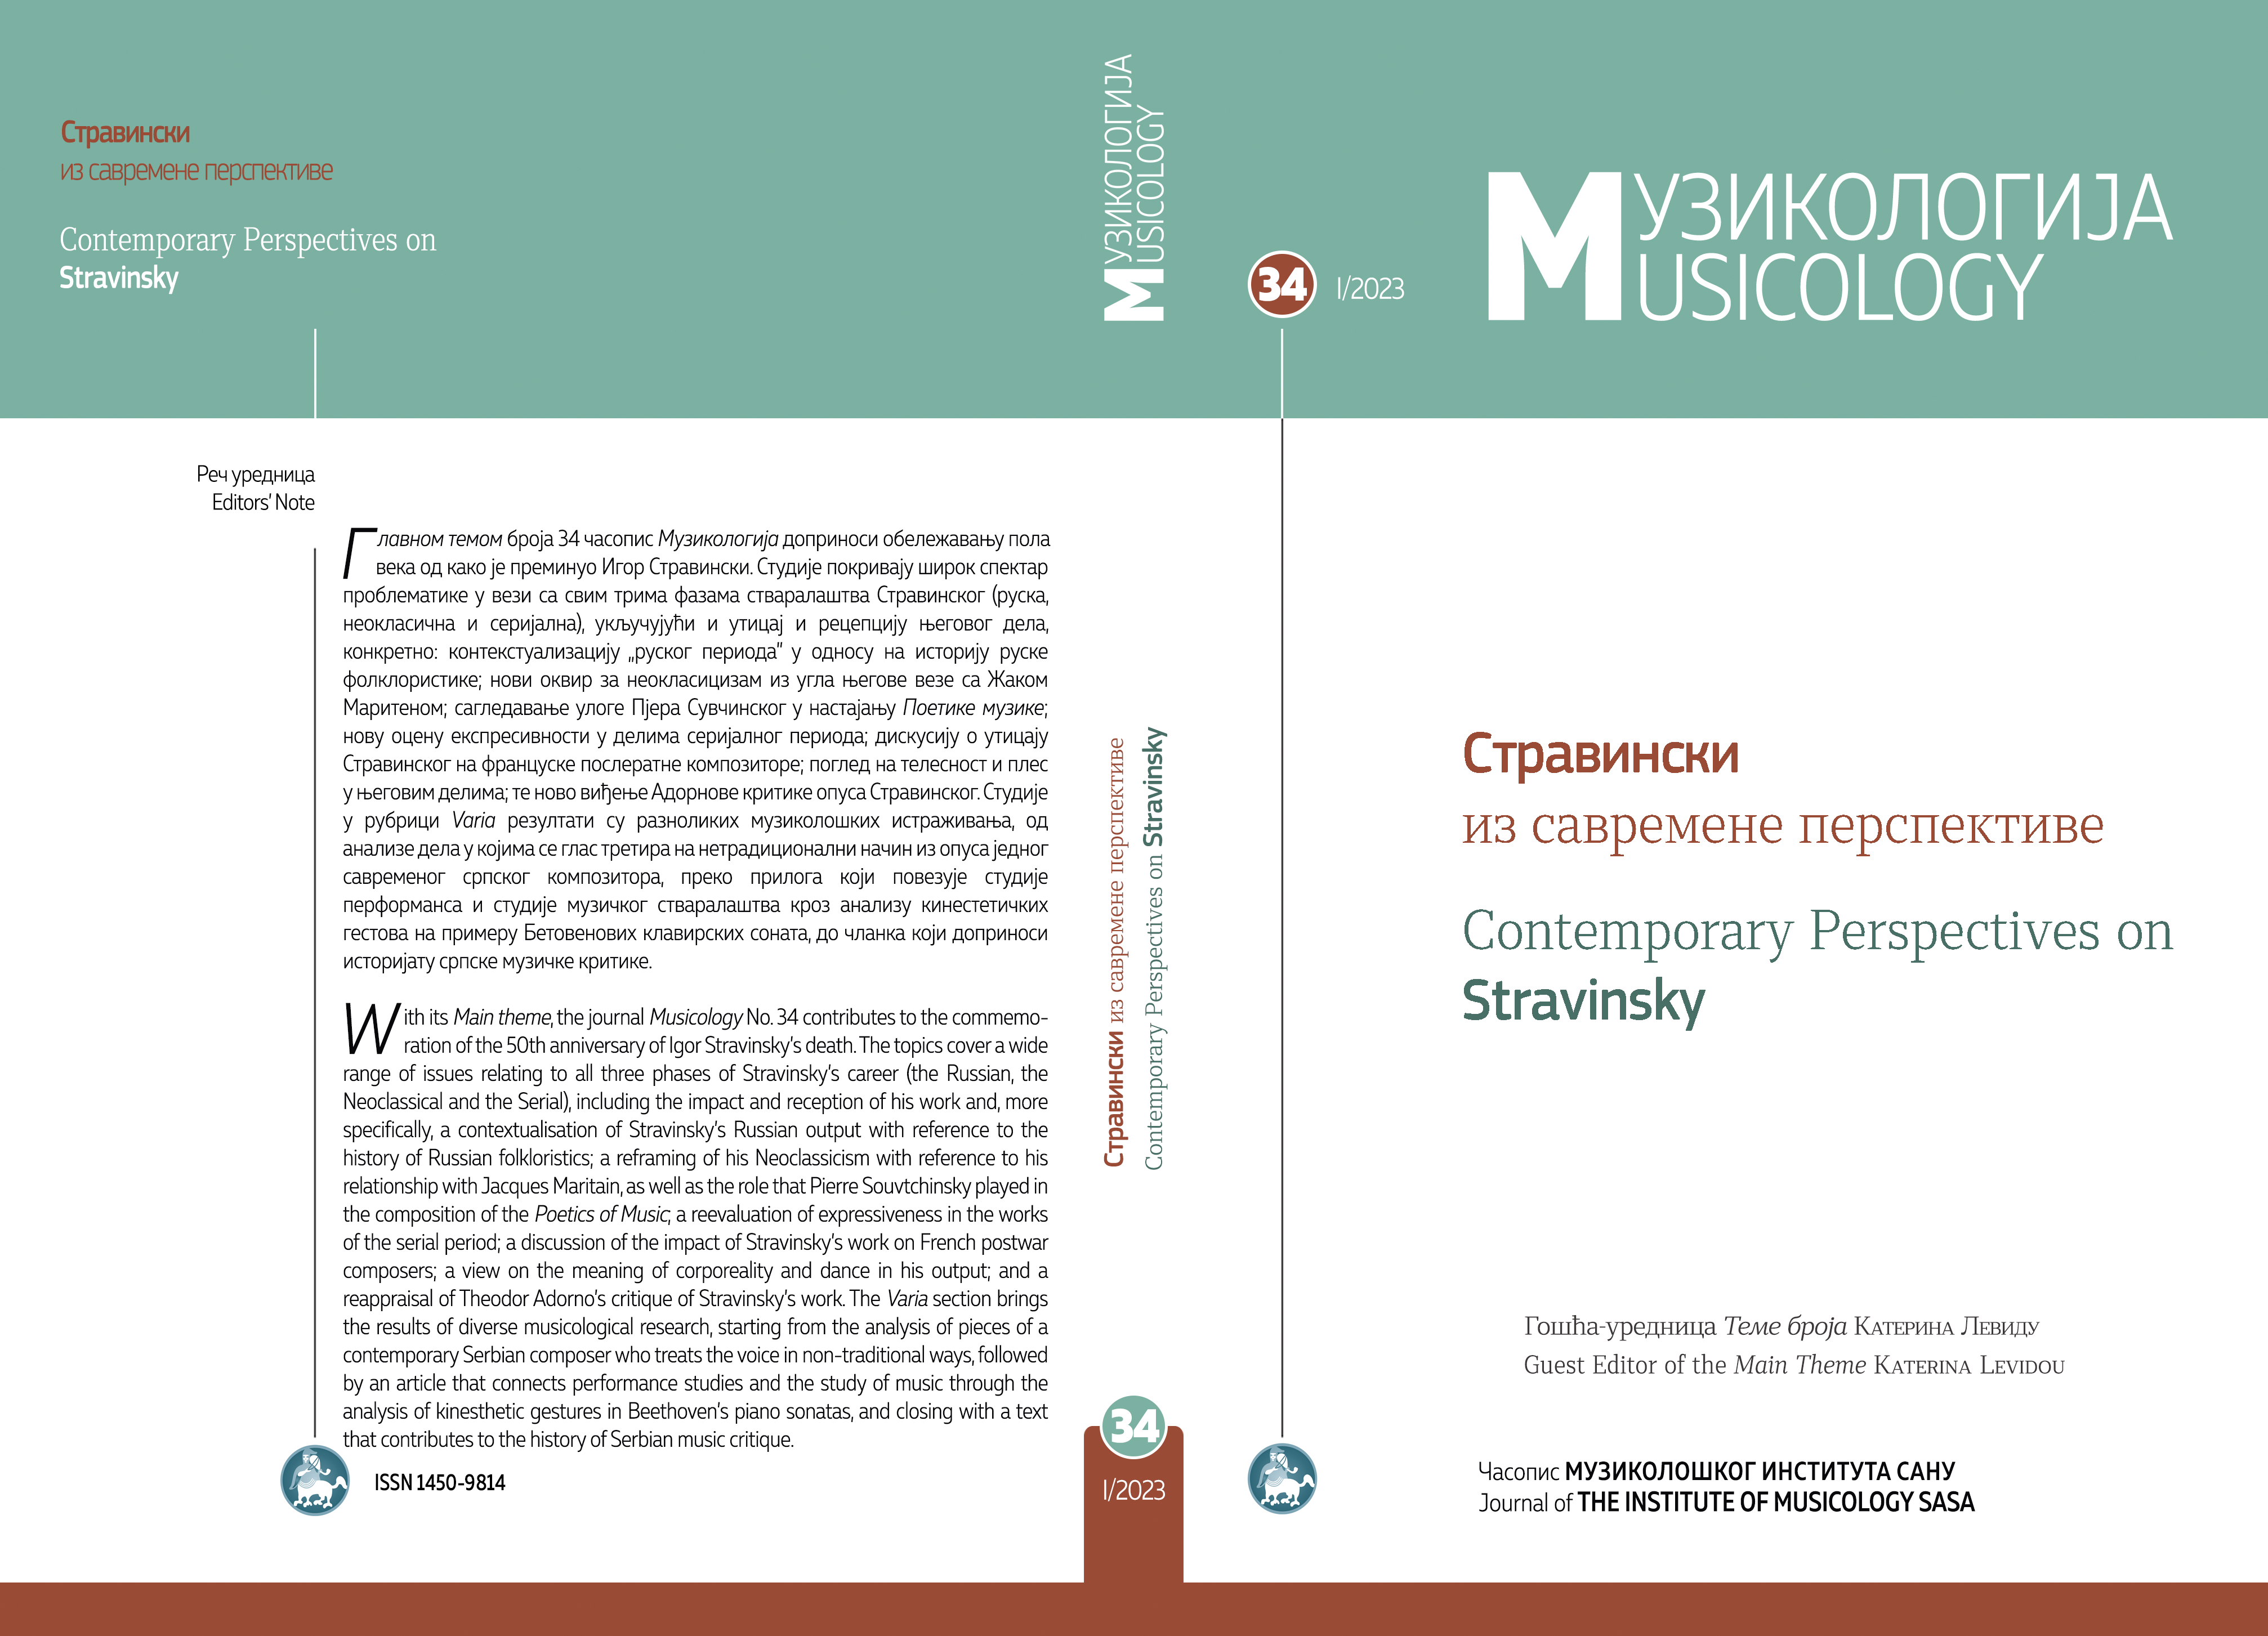 Sakharov, Kireevsky, Afanasyev and Others: Stravinsky in the Context of Russian Folkloristics